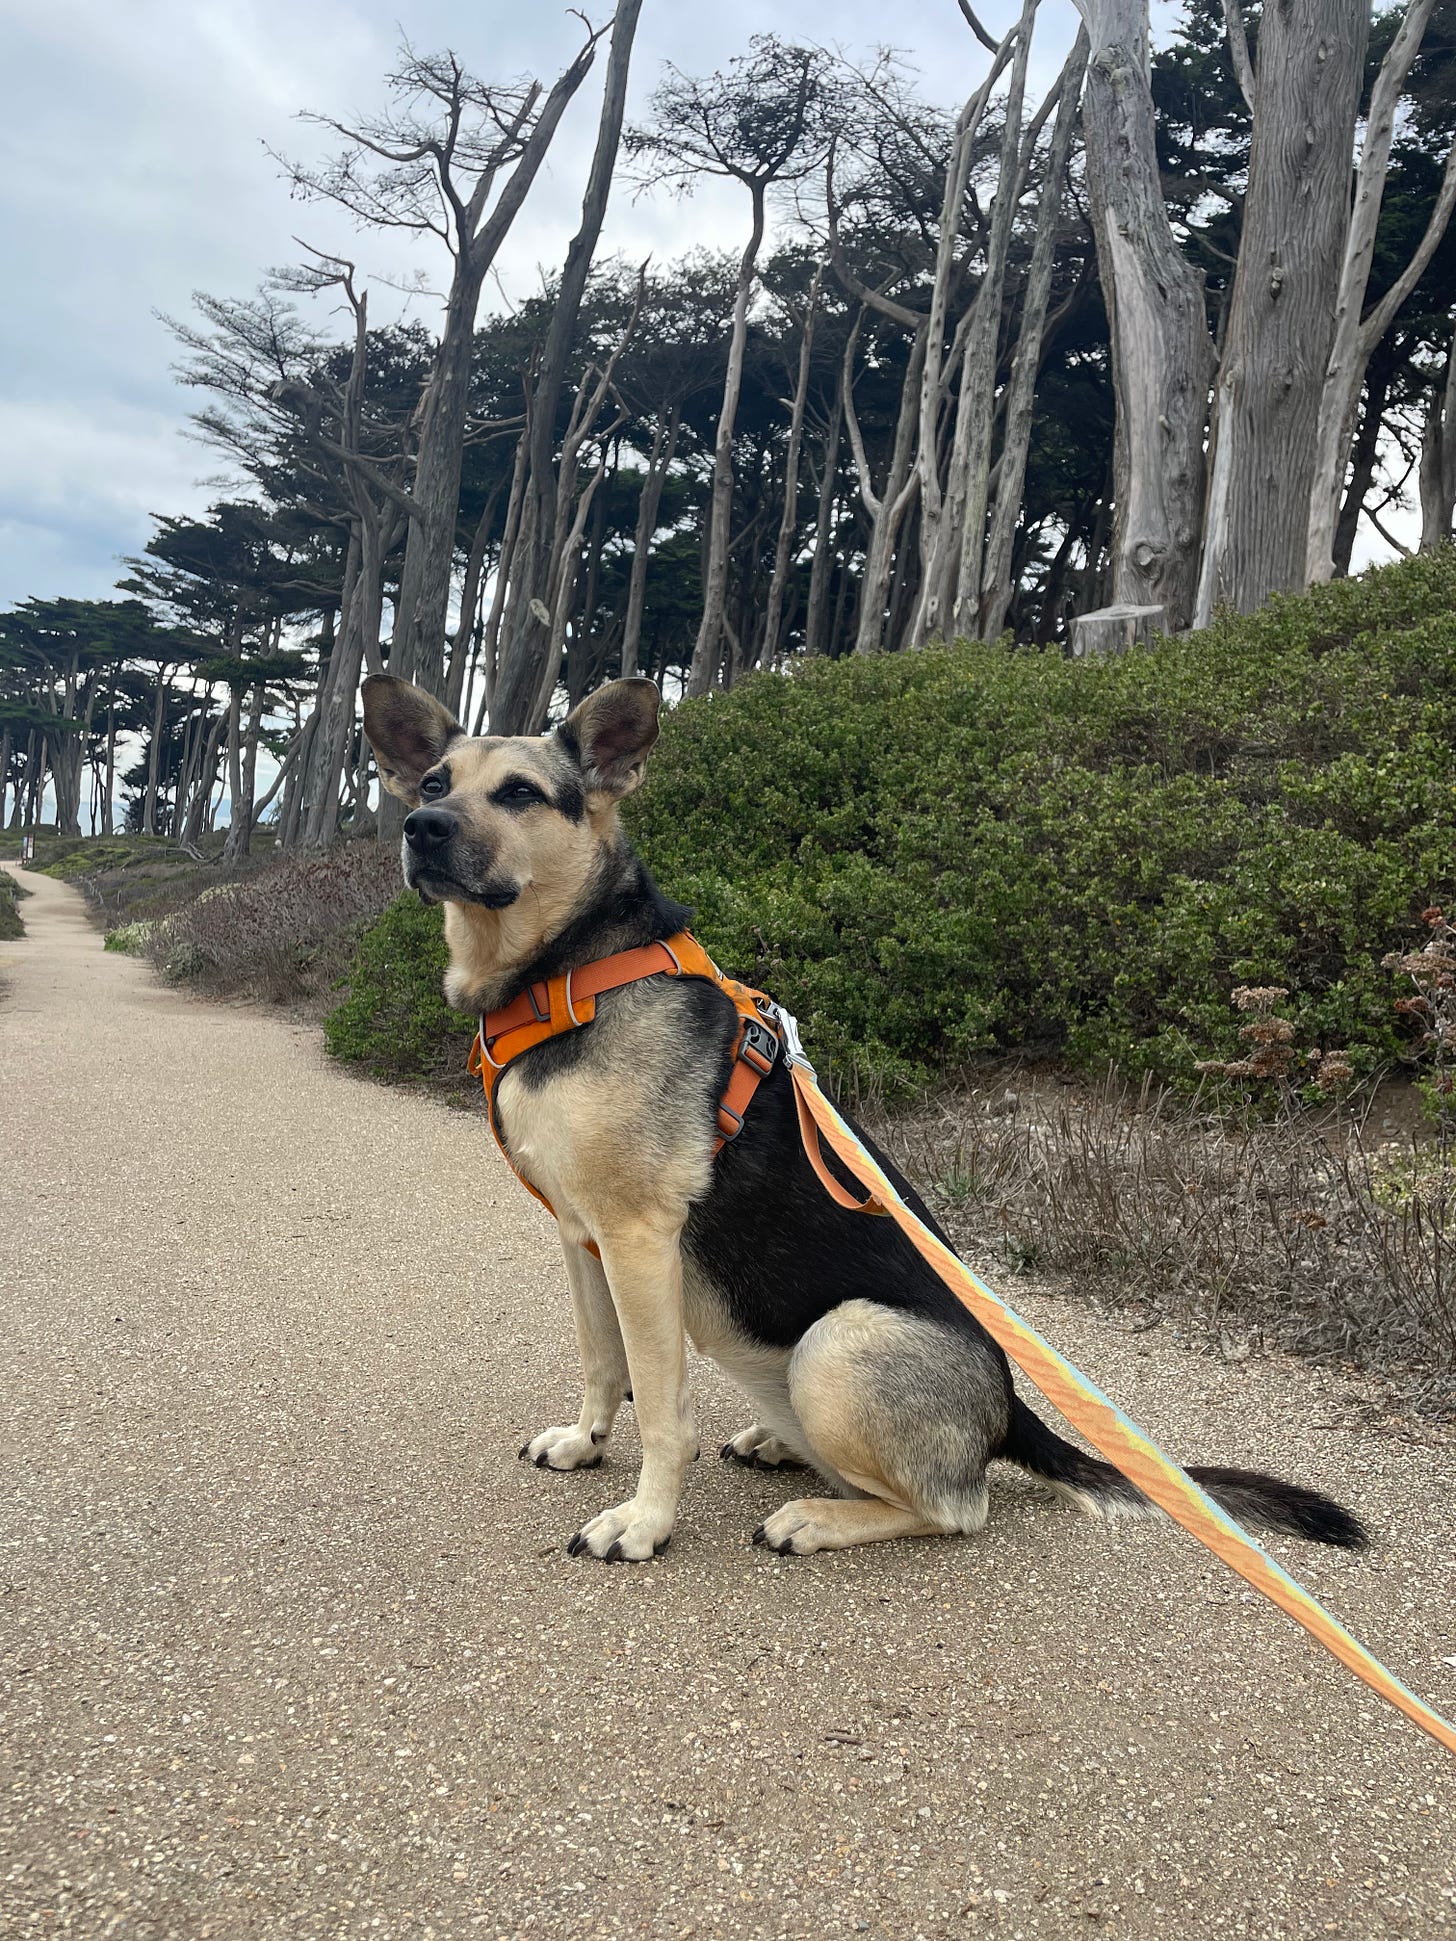 Black and light brown dog in an orange harness sitting on a trail with trees and a grey sky in the background